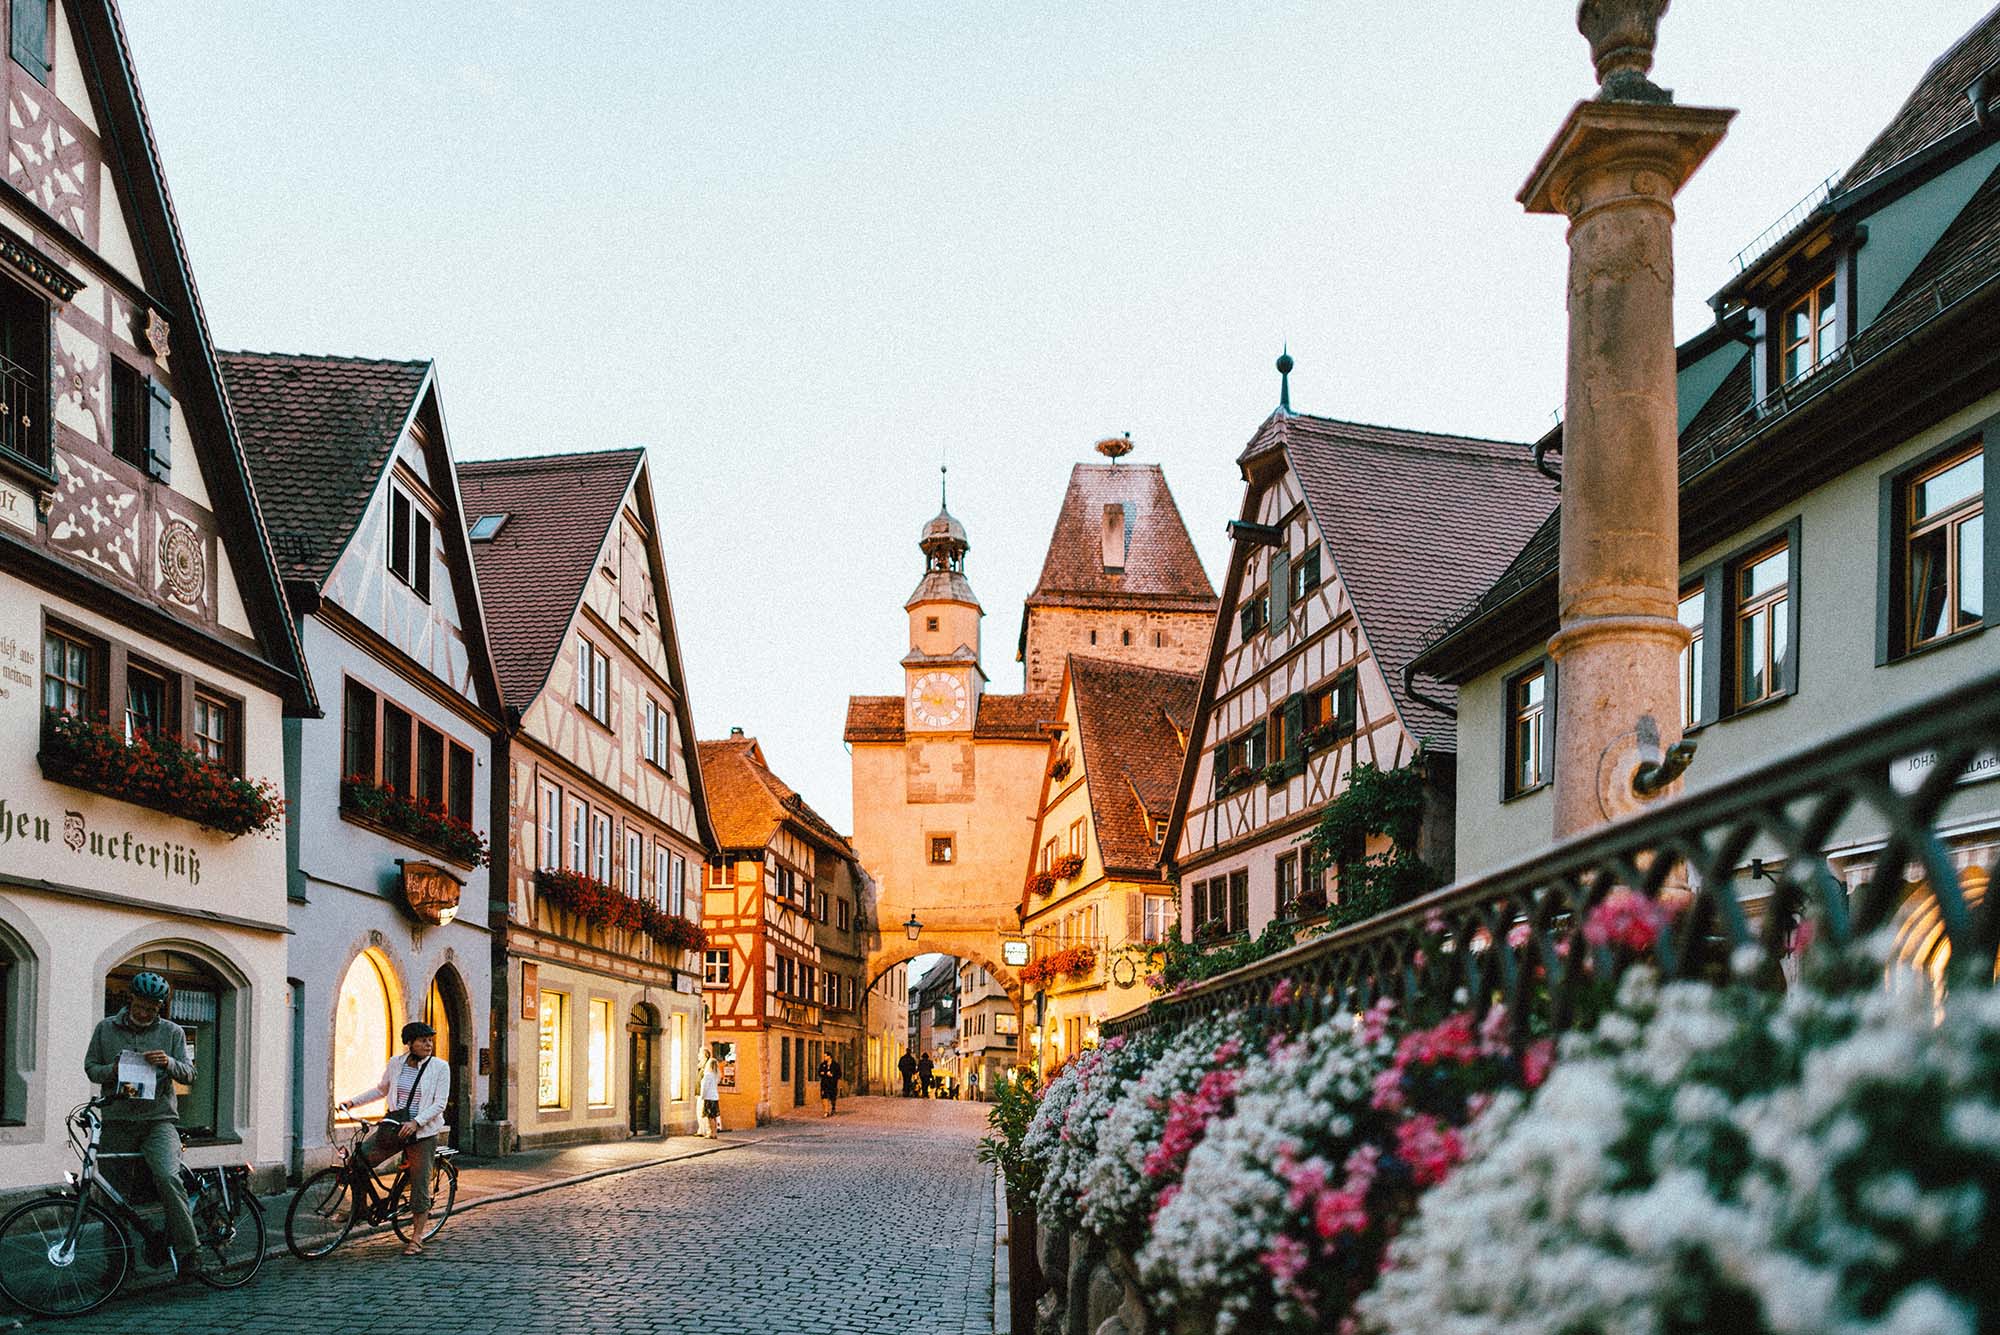 Quaint and beautiful German street scene from Rothenburg ob der Tauber, Germany